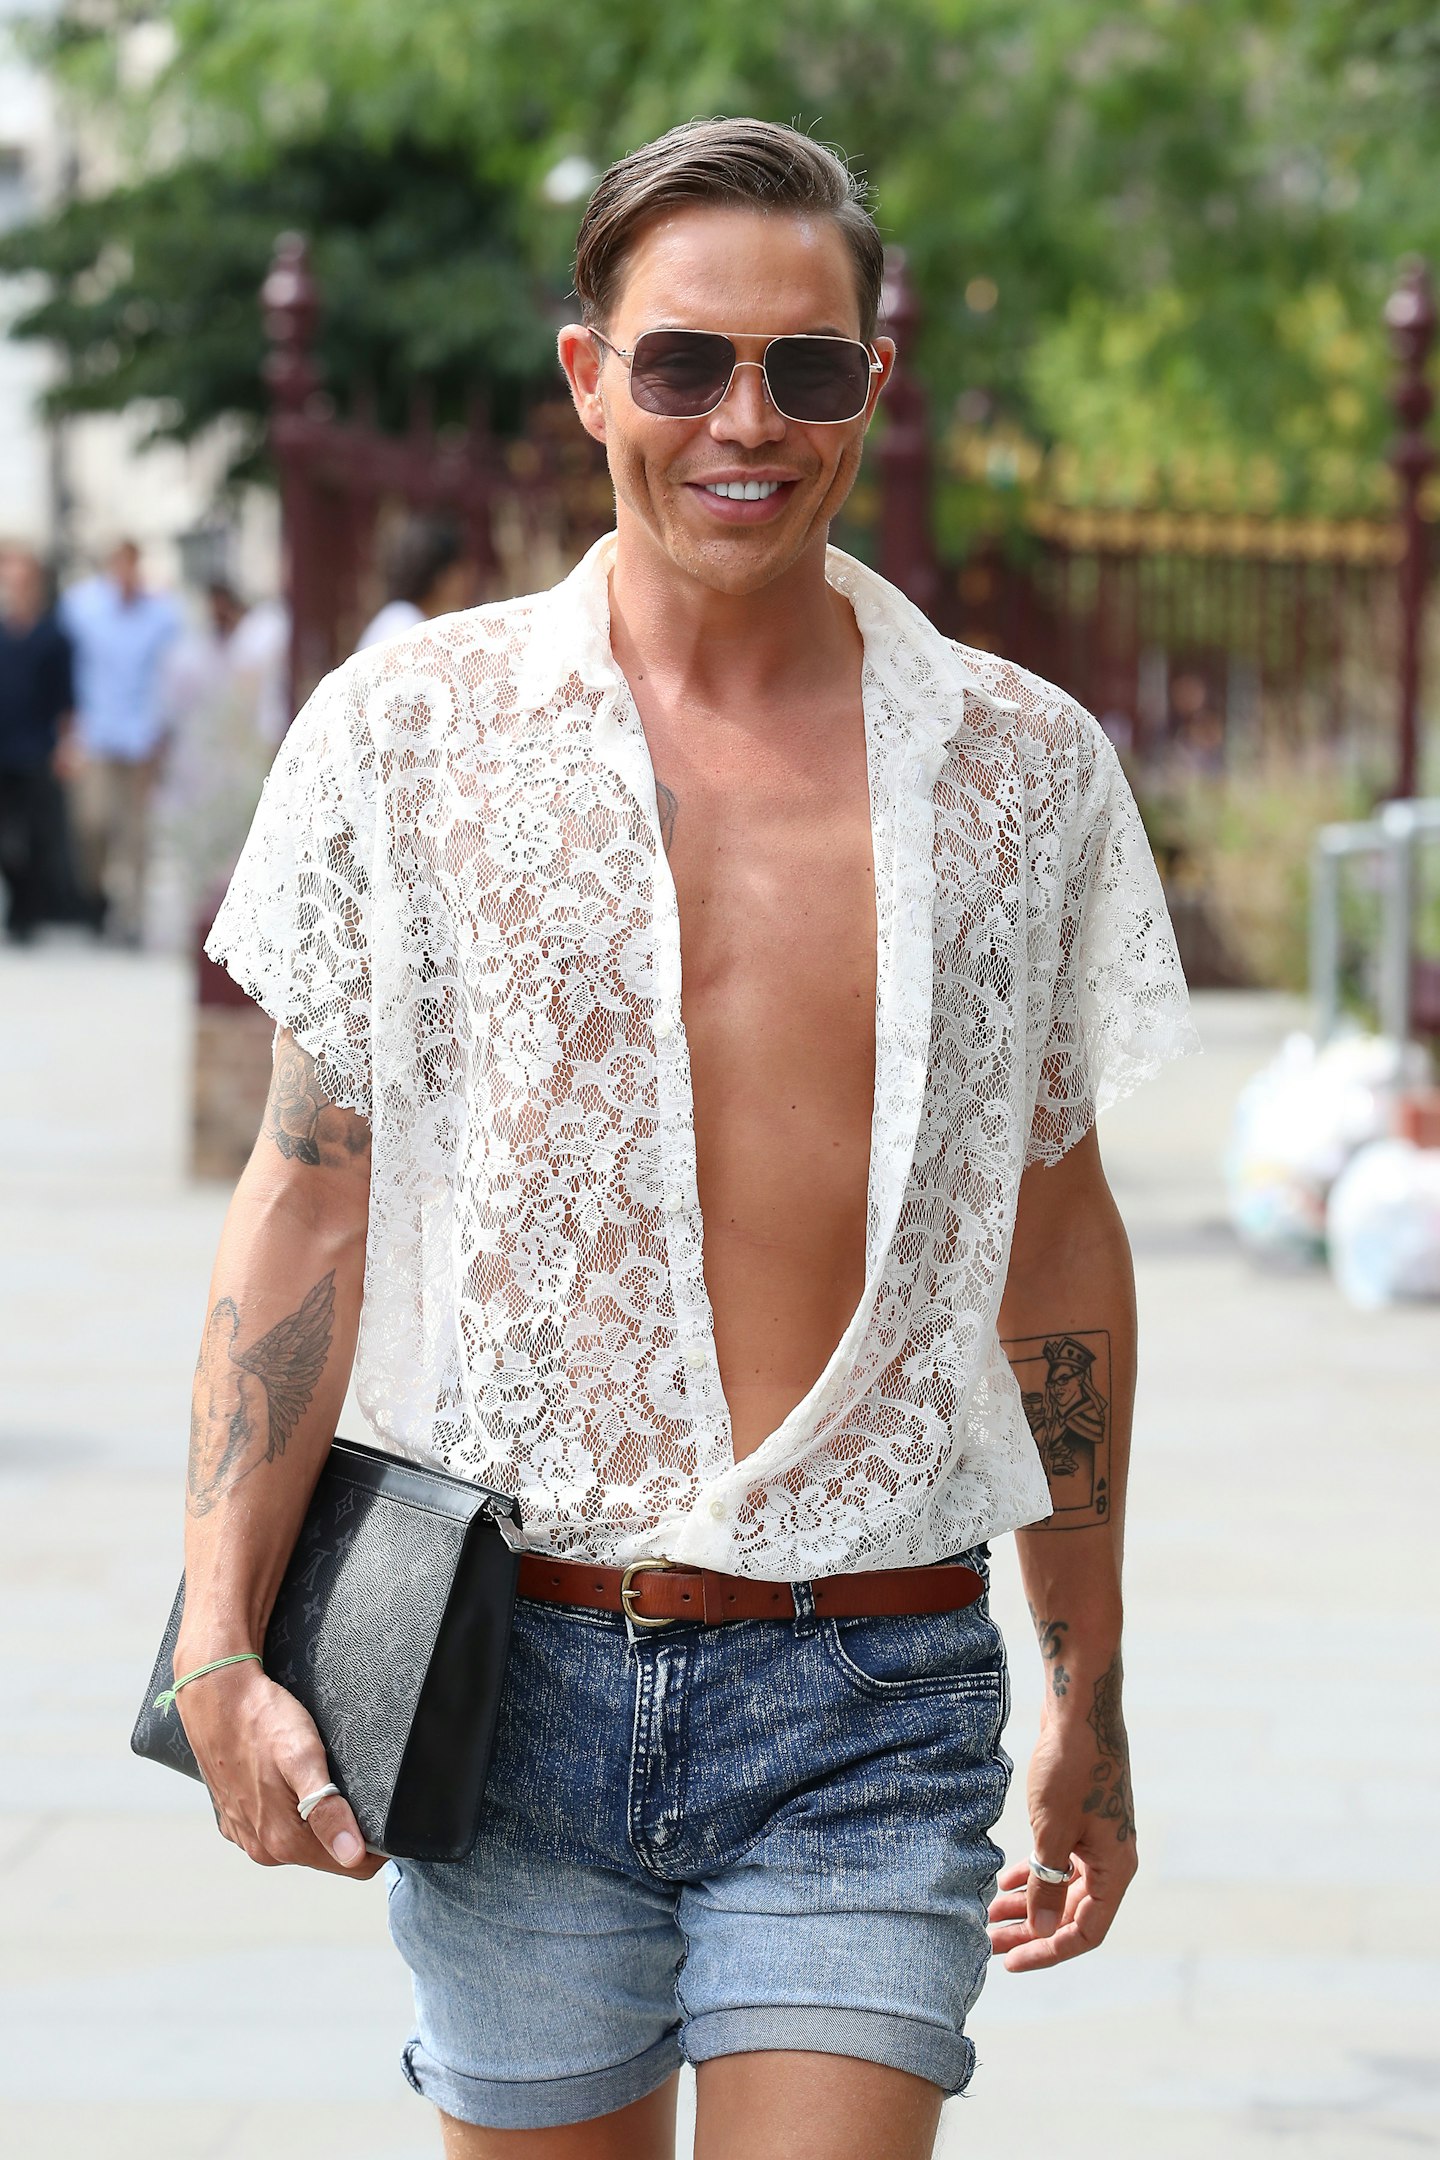 TOWIE's Bobby Norris